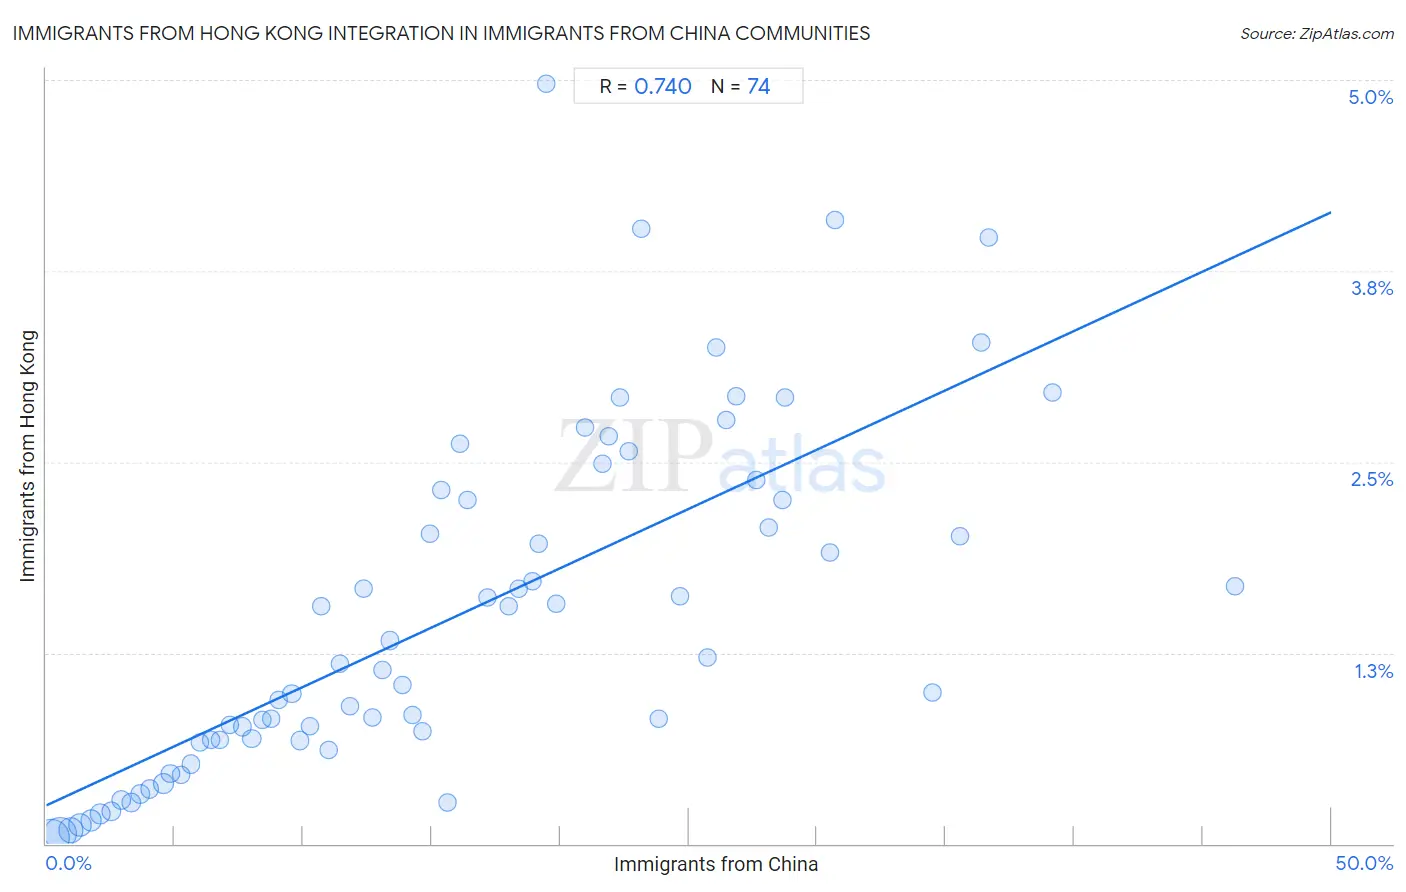 Immigrants from China Integration in Immigrants from Hong Kong Communities